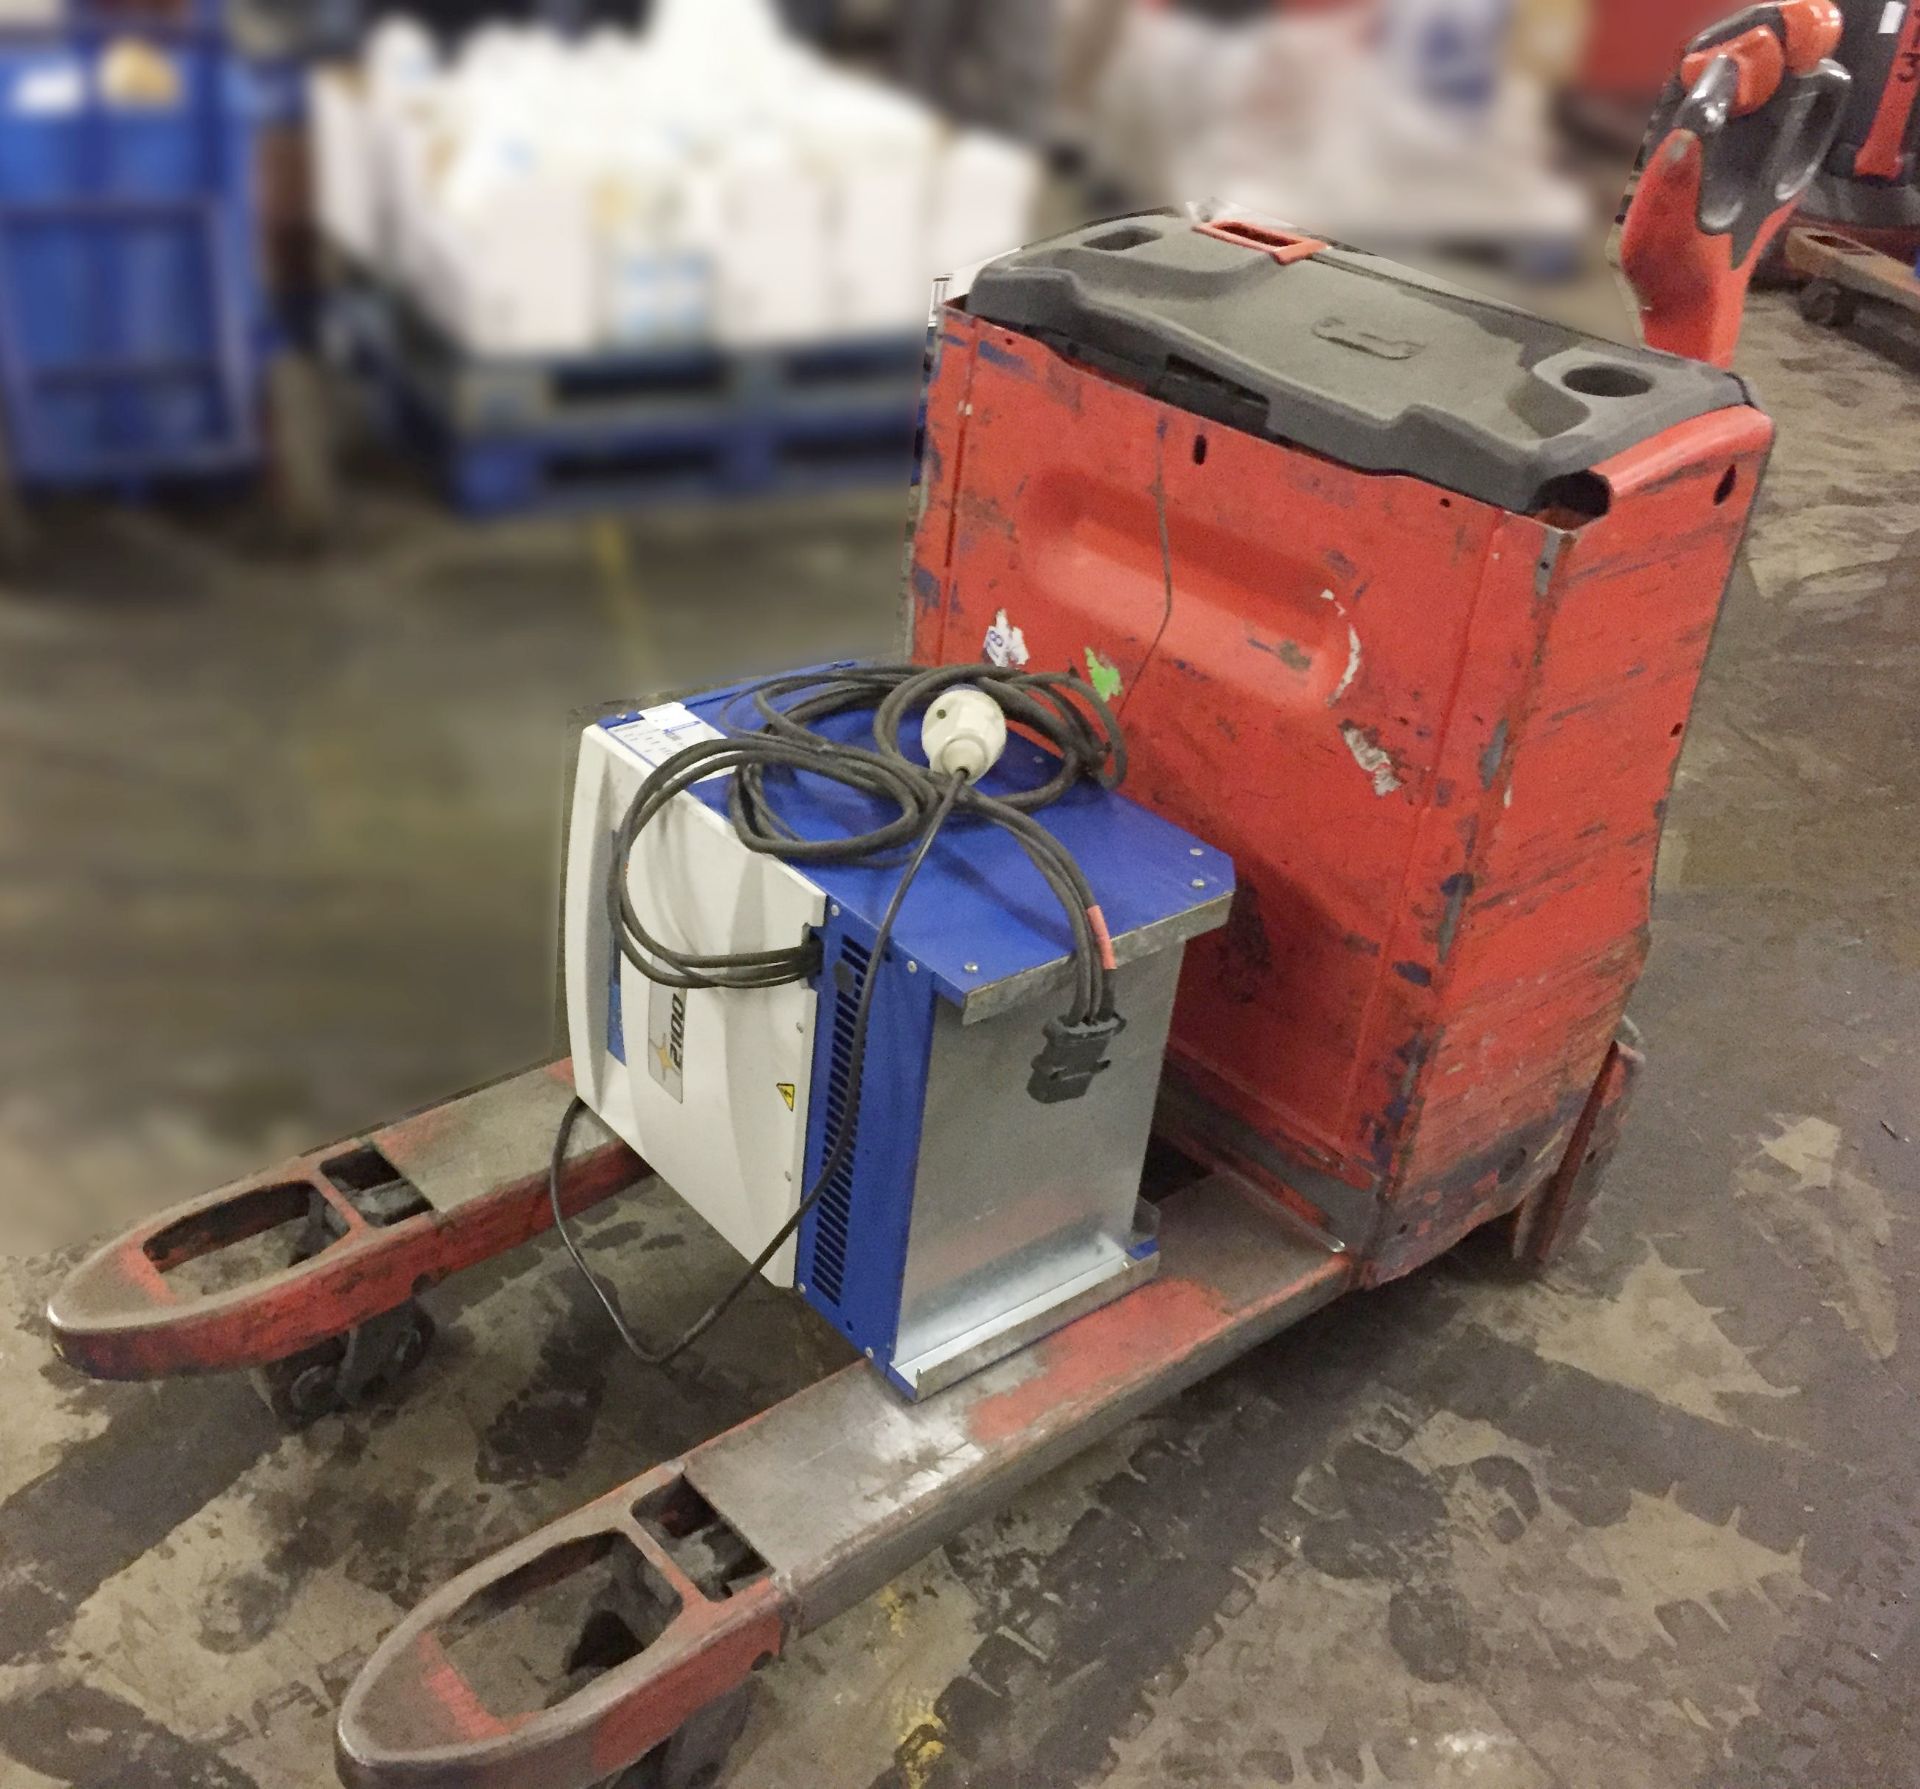 1 x Linde T20 Electric Pallet Truck - Tested and Working - Key and Charger Included - Bolton BL1